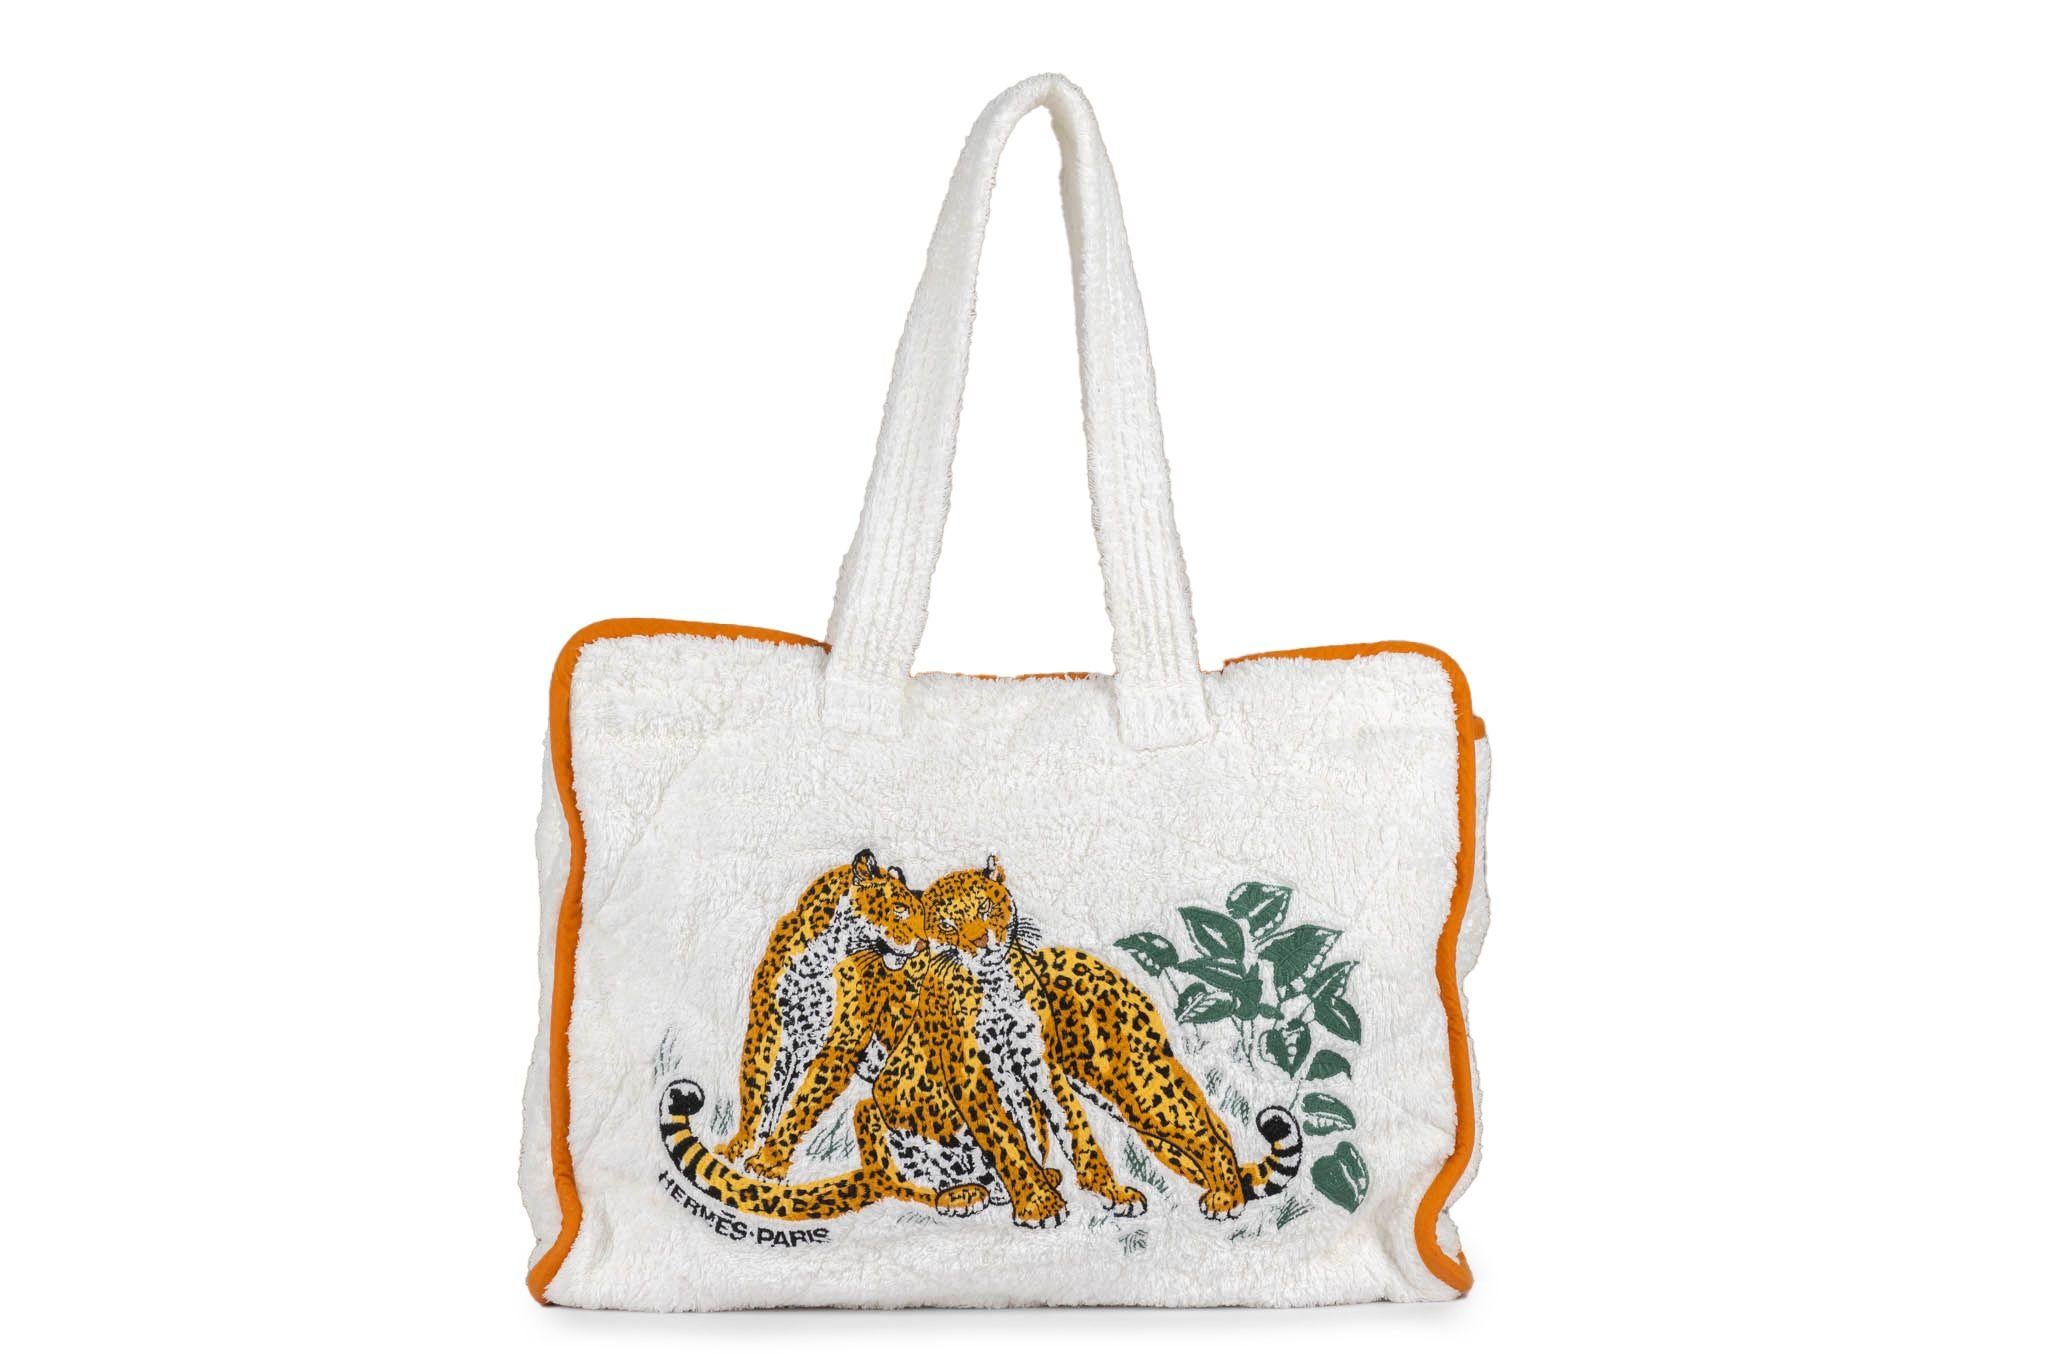 Hermès Jungle Love White Beach Set In Excellent Condition For Sale In West Hollywood, CA